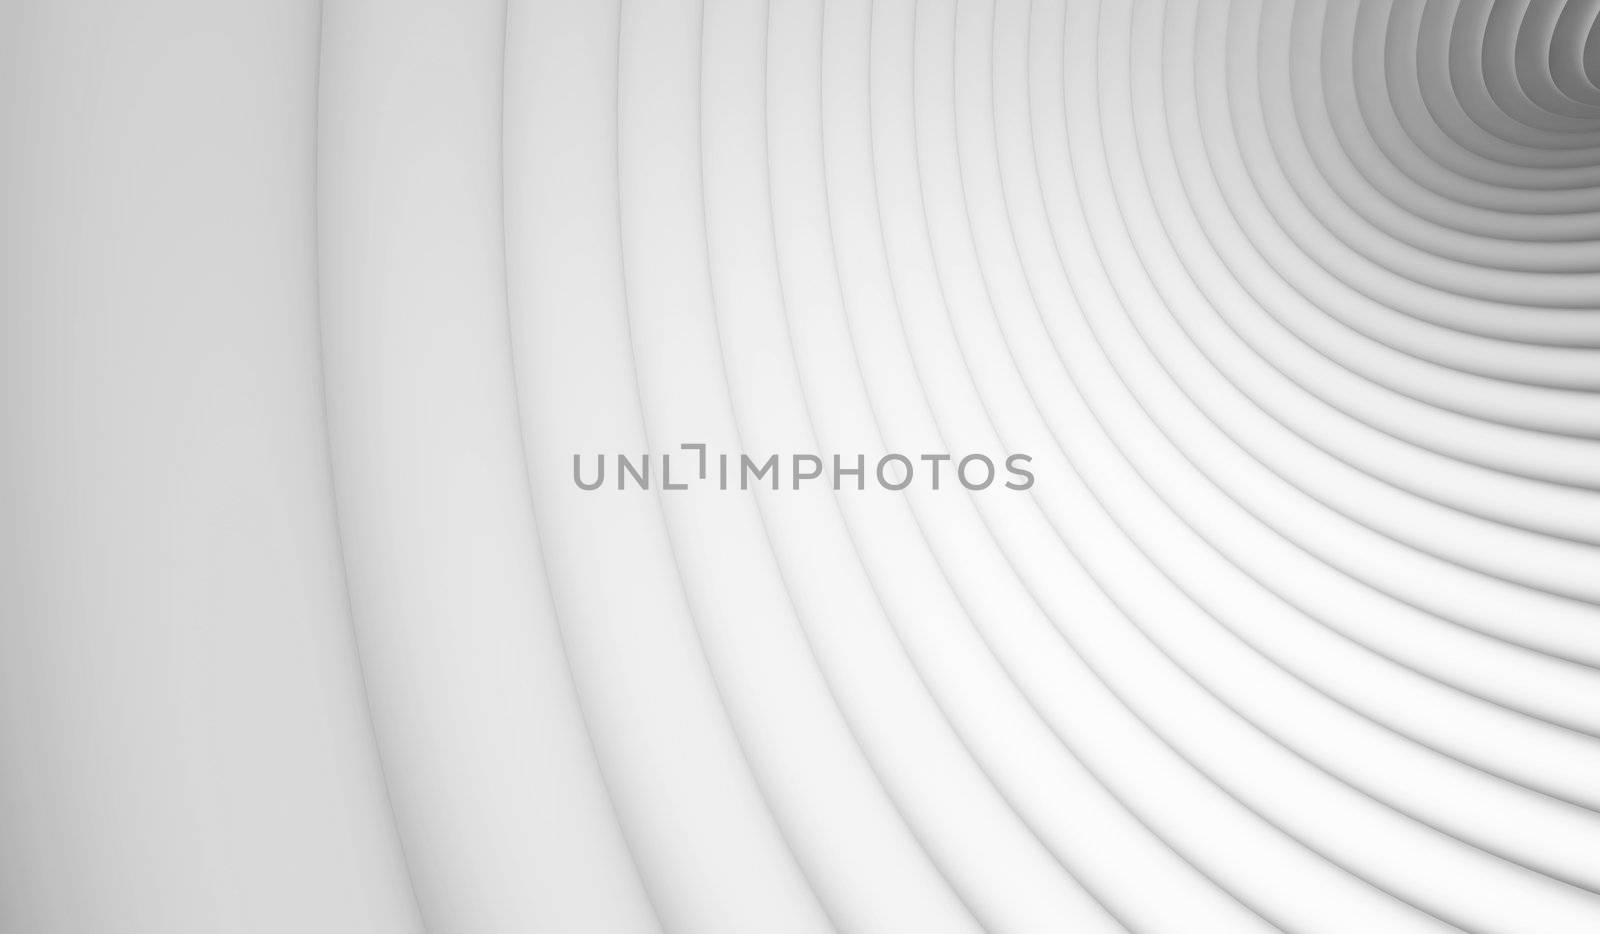 Abstract Architectural Background or Abstract Tunnel